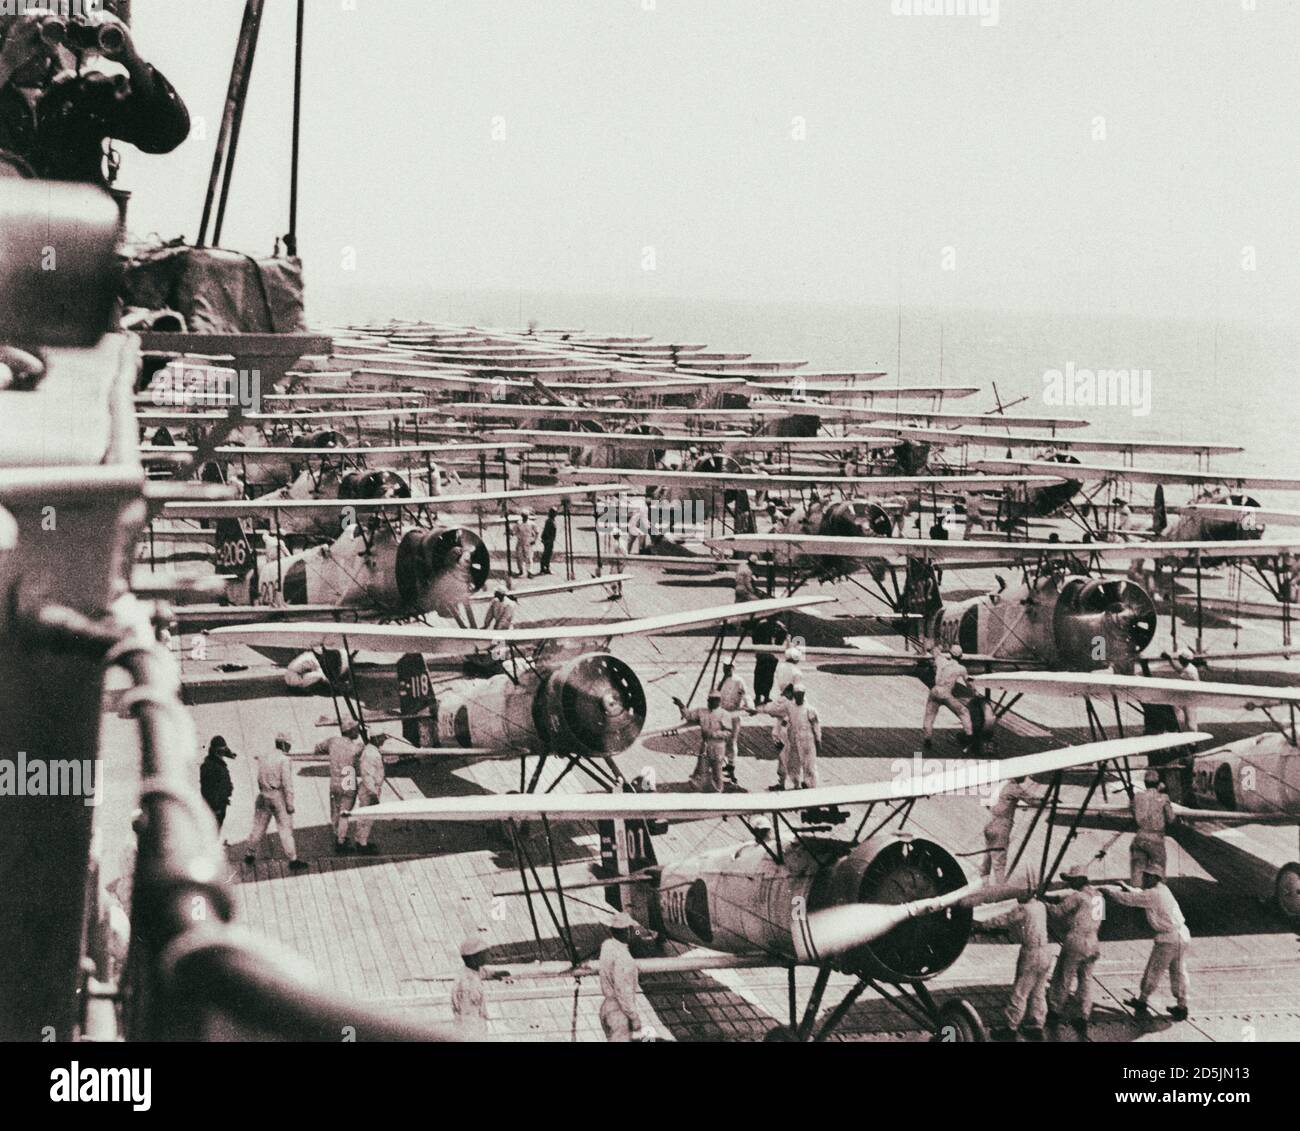 The Japanese “Kaga” aircraft carrier conducts flight operations during the Japan-China War in 1937. China. May 1937 On the deck of “Kaga” aircraft car Stock Photo